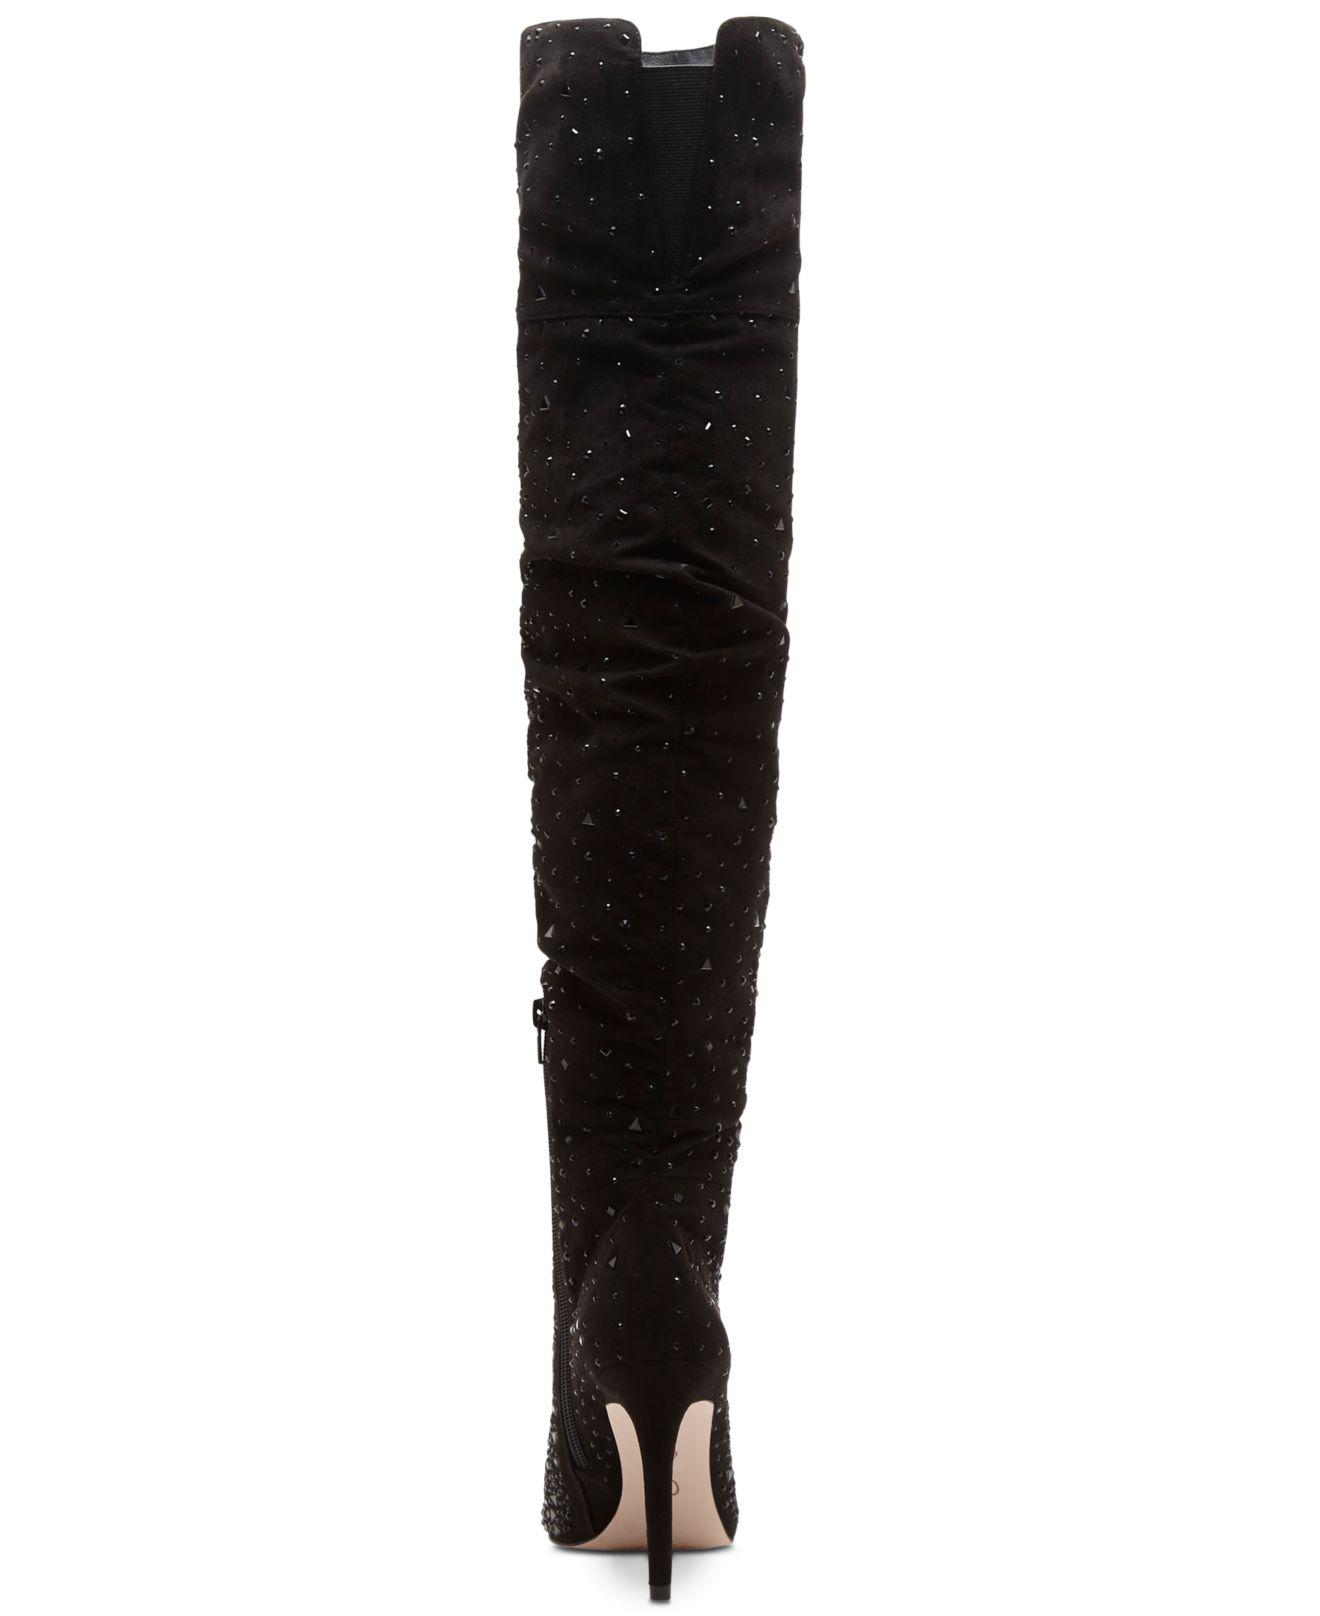 luxella2 over the knee boots